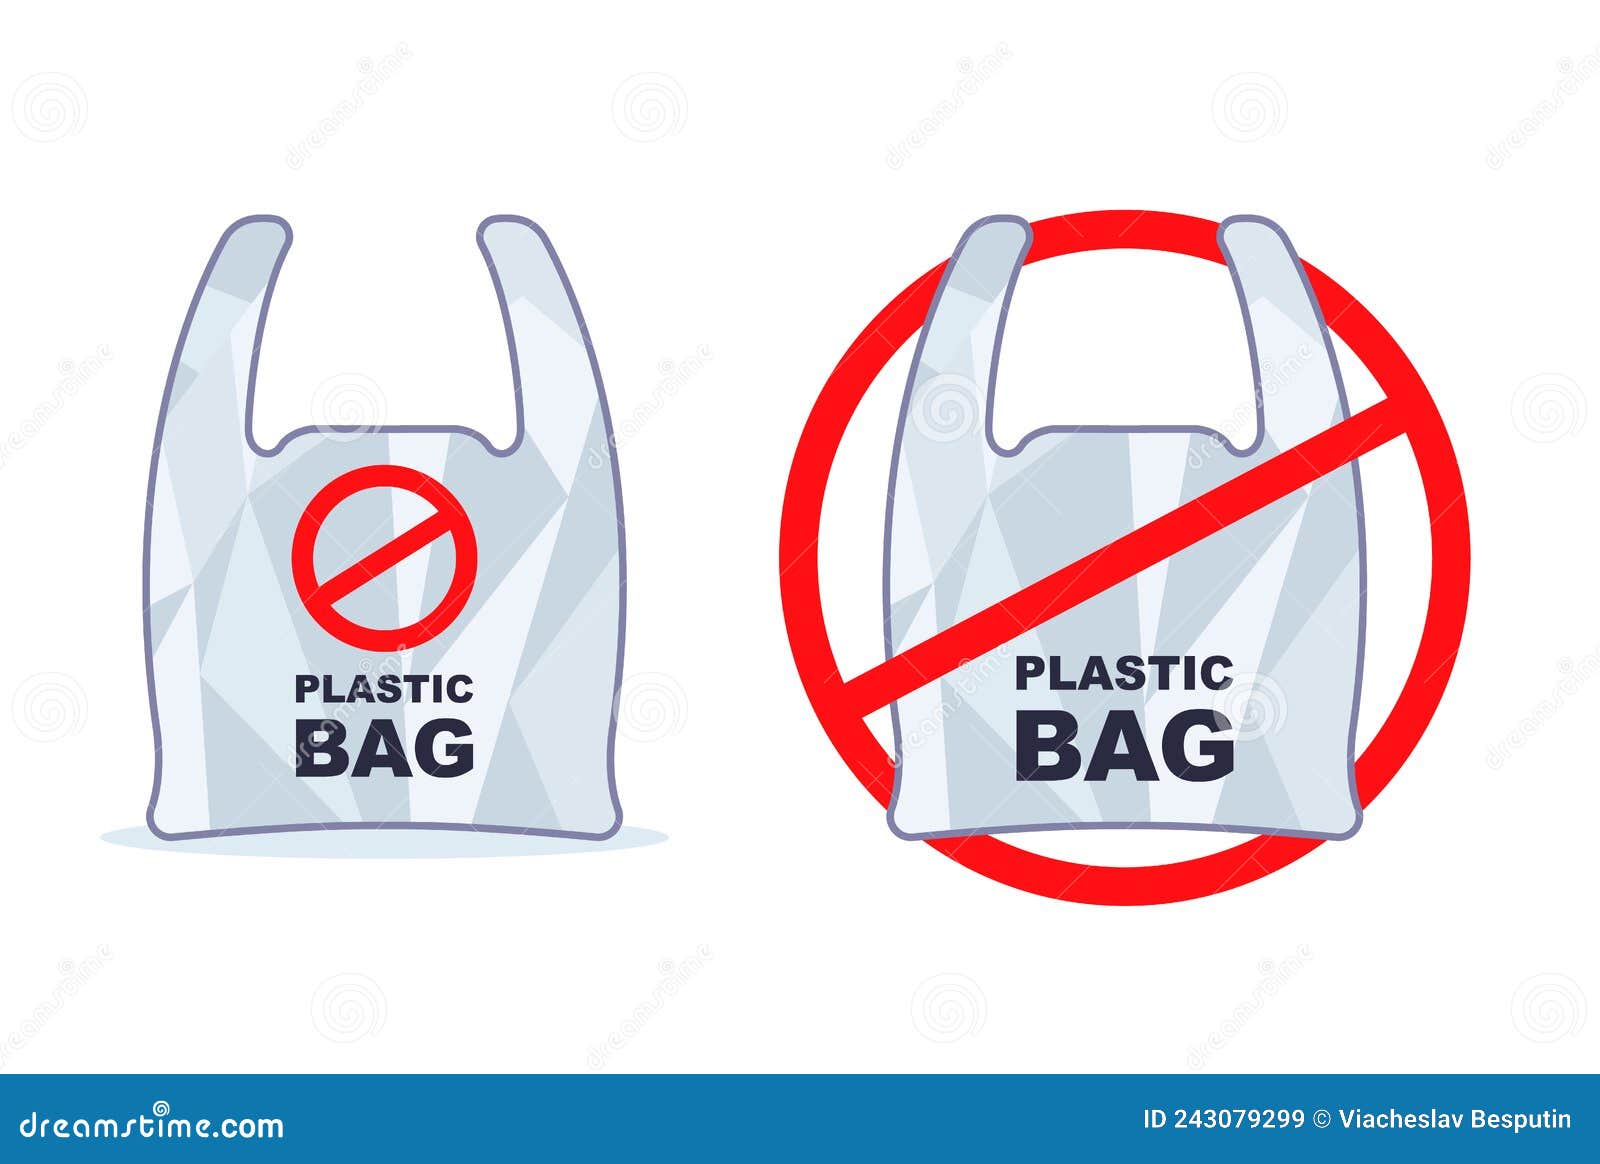 It is Forbidden To Use a Plastic Bag in Grocery Stores. Prohibition ...